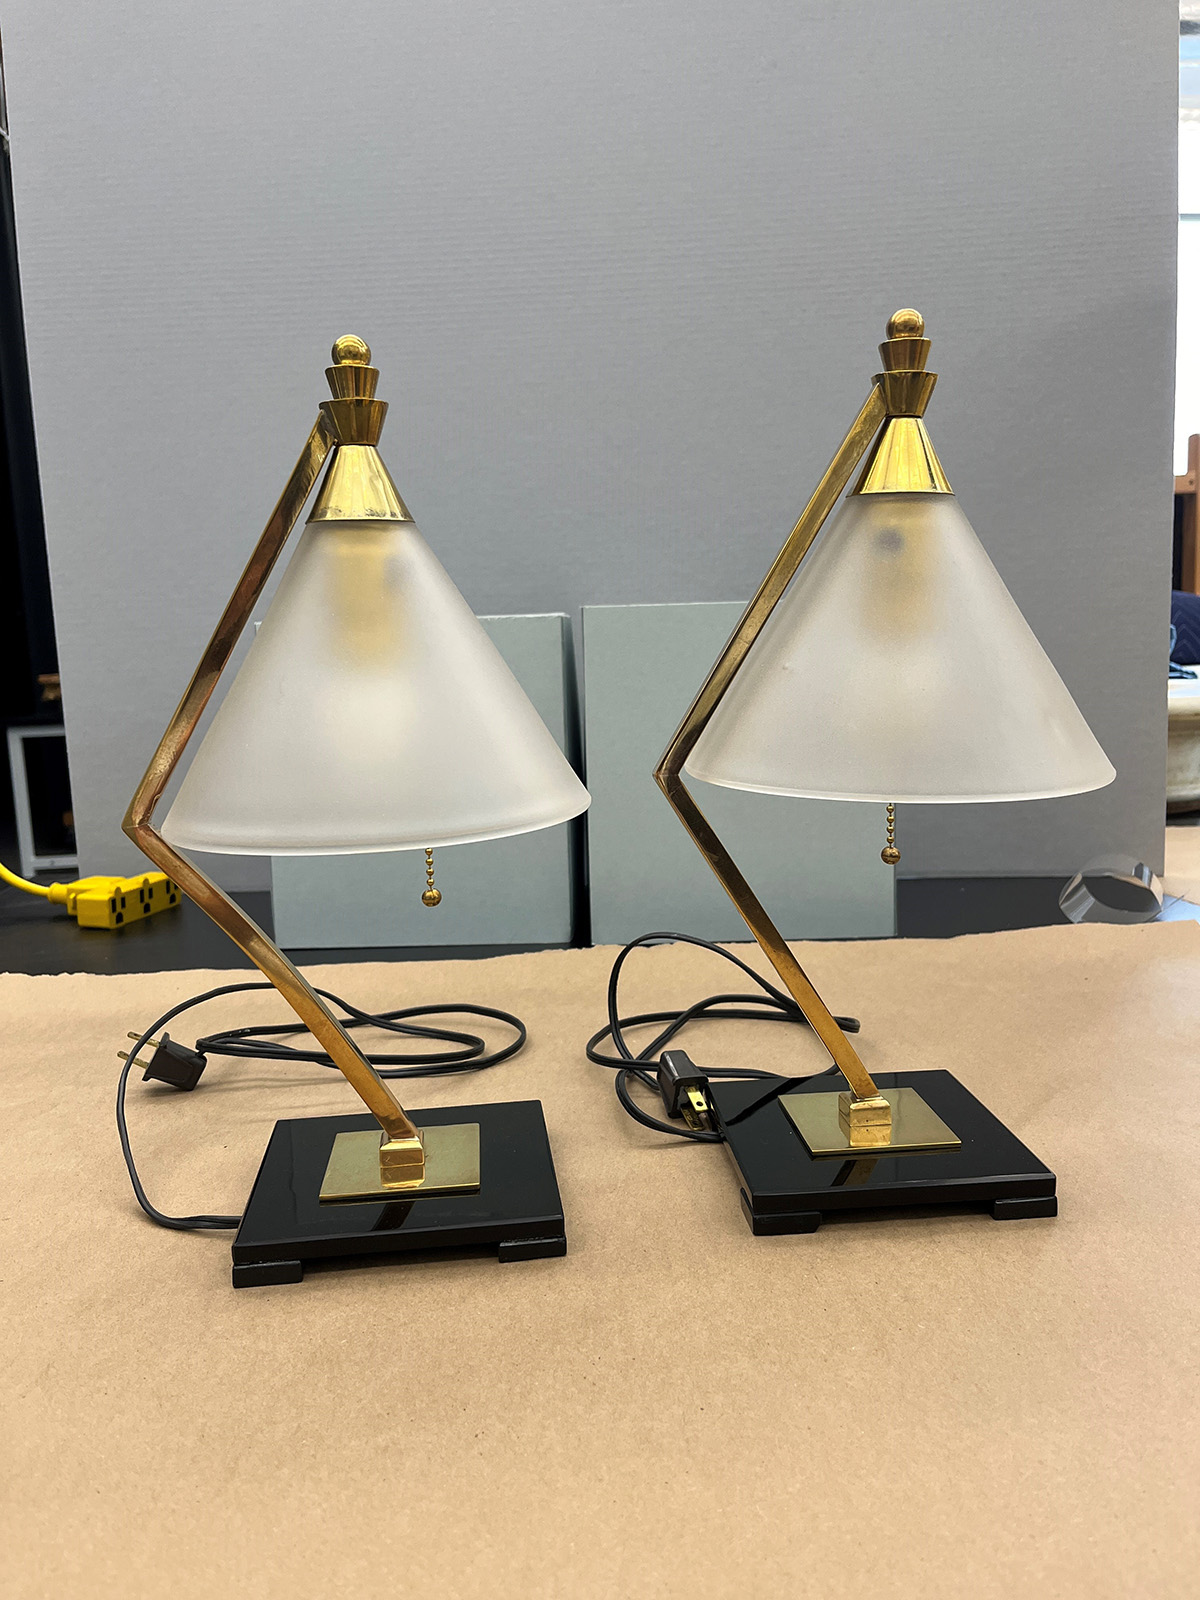 Two angular lamps with gold fixtures, opaque glass shades, and shiny black bases